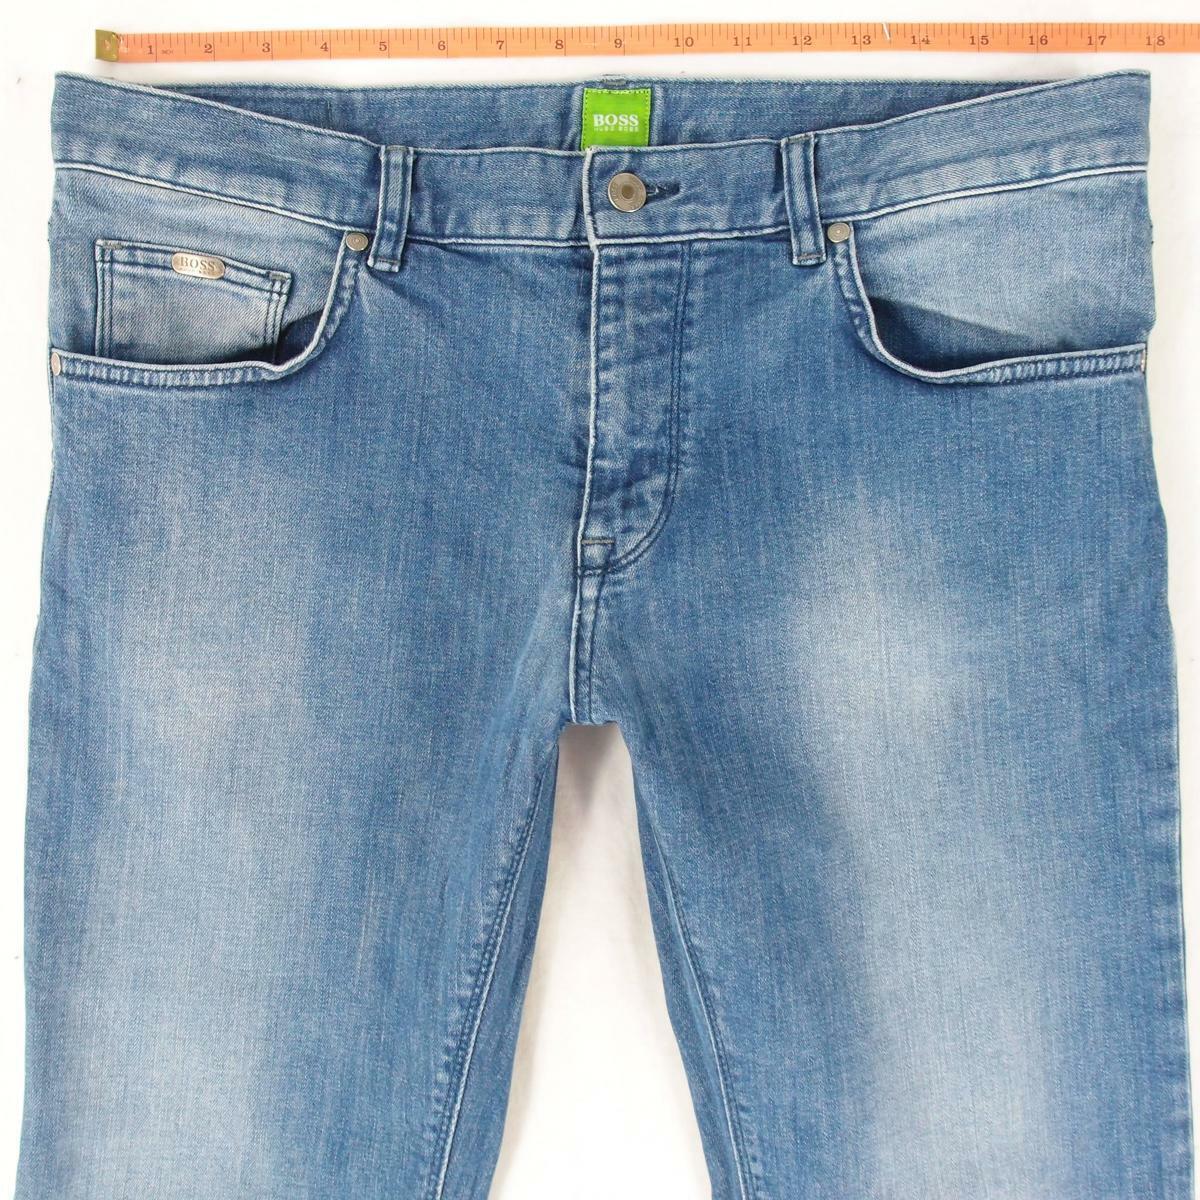 Hombres HUGO BOSS MAINE Regular Free shipping anywhere in the nation Super intense SALE Recto Elástico L3 Jeans W34 Azul